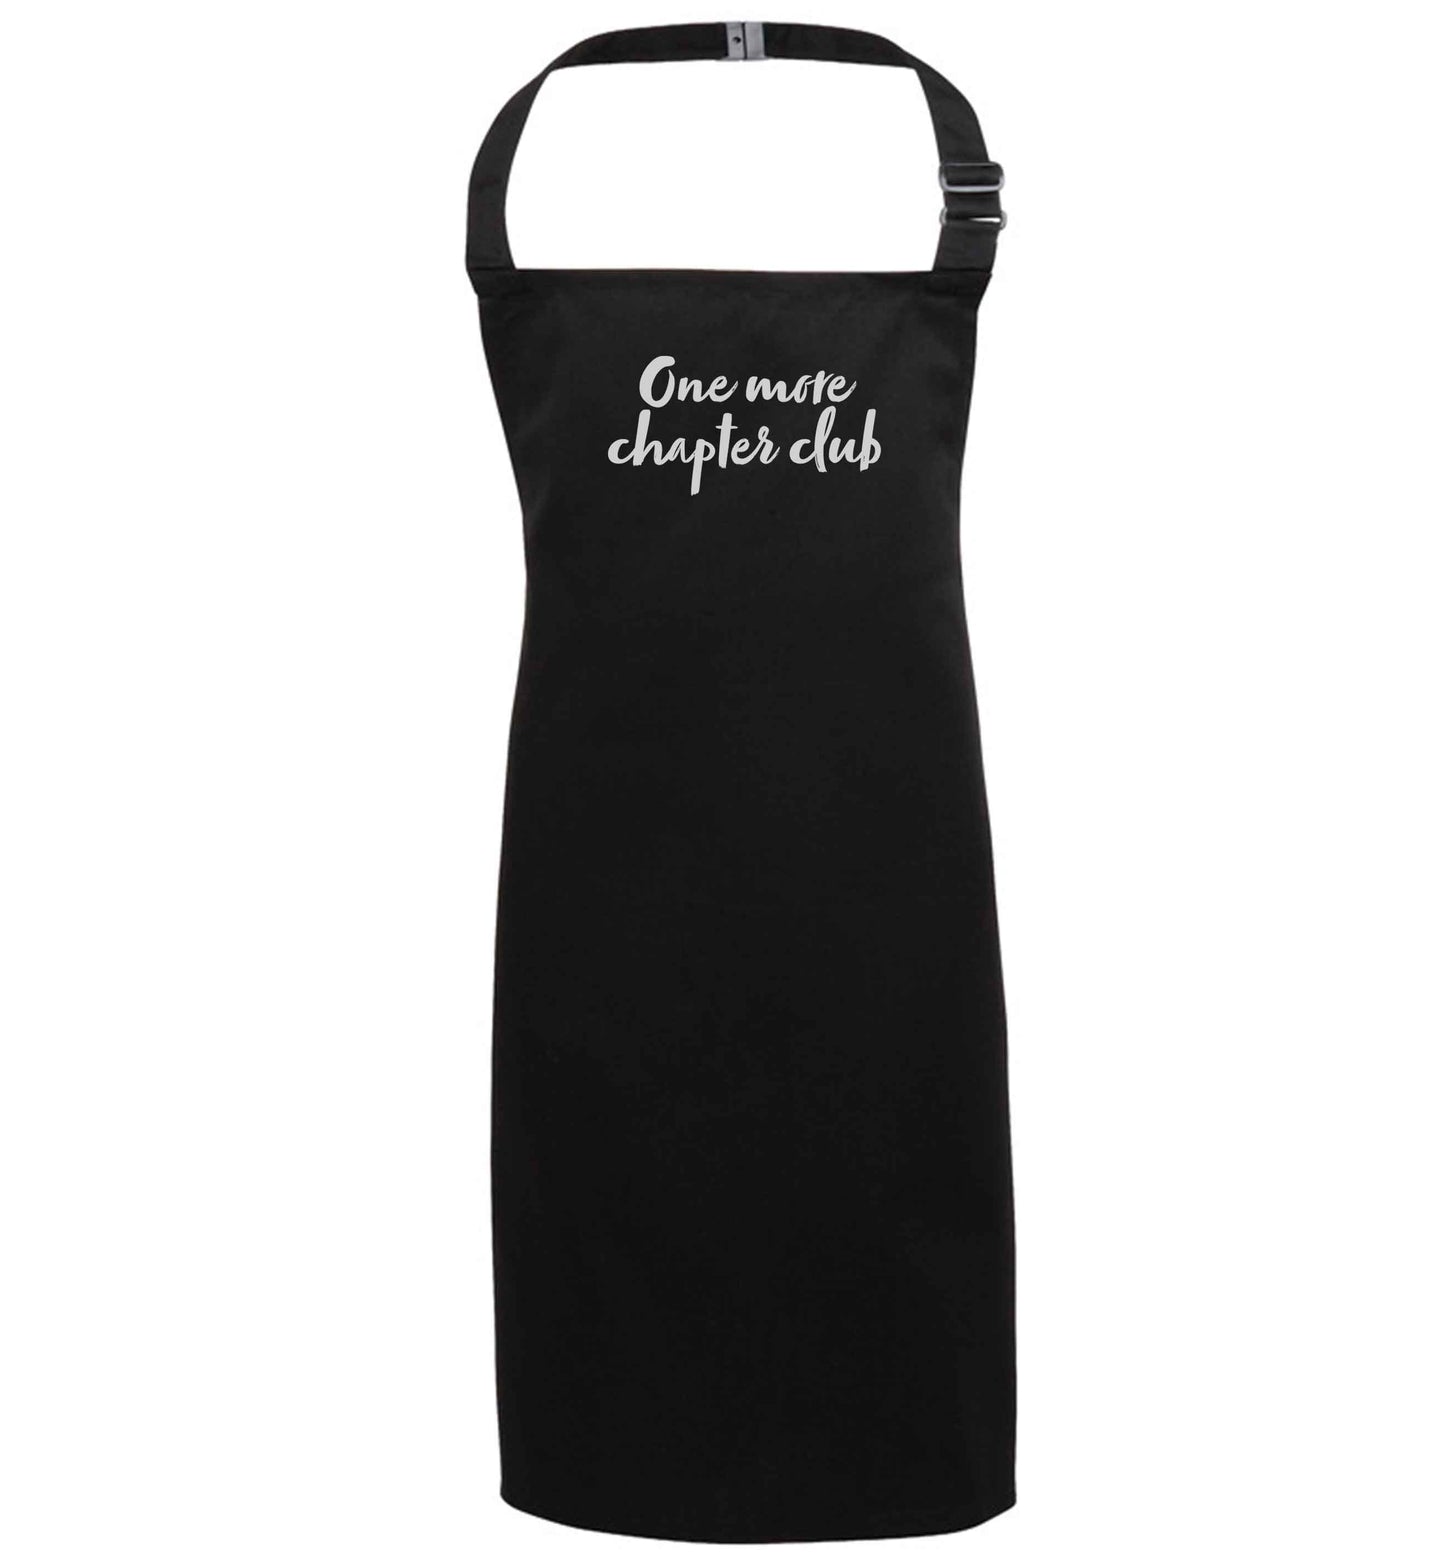 One more chapter club Kit black apron 7-10 years